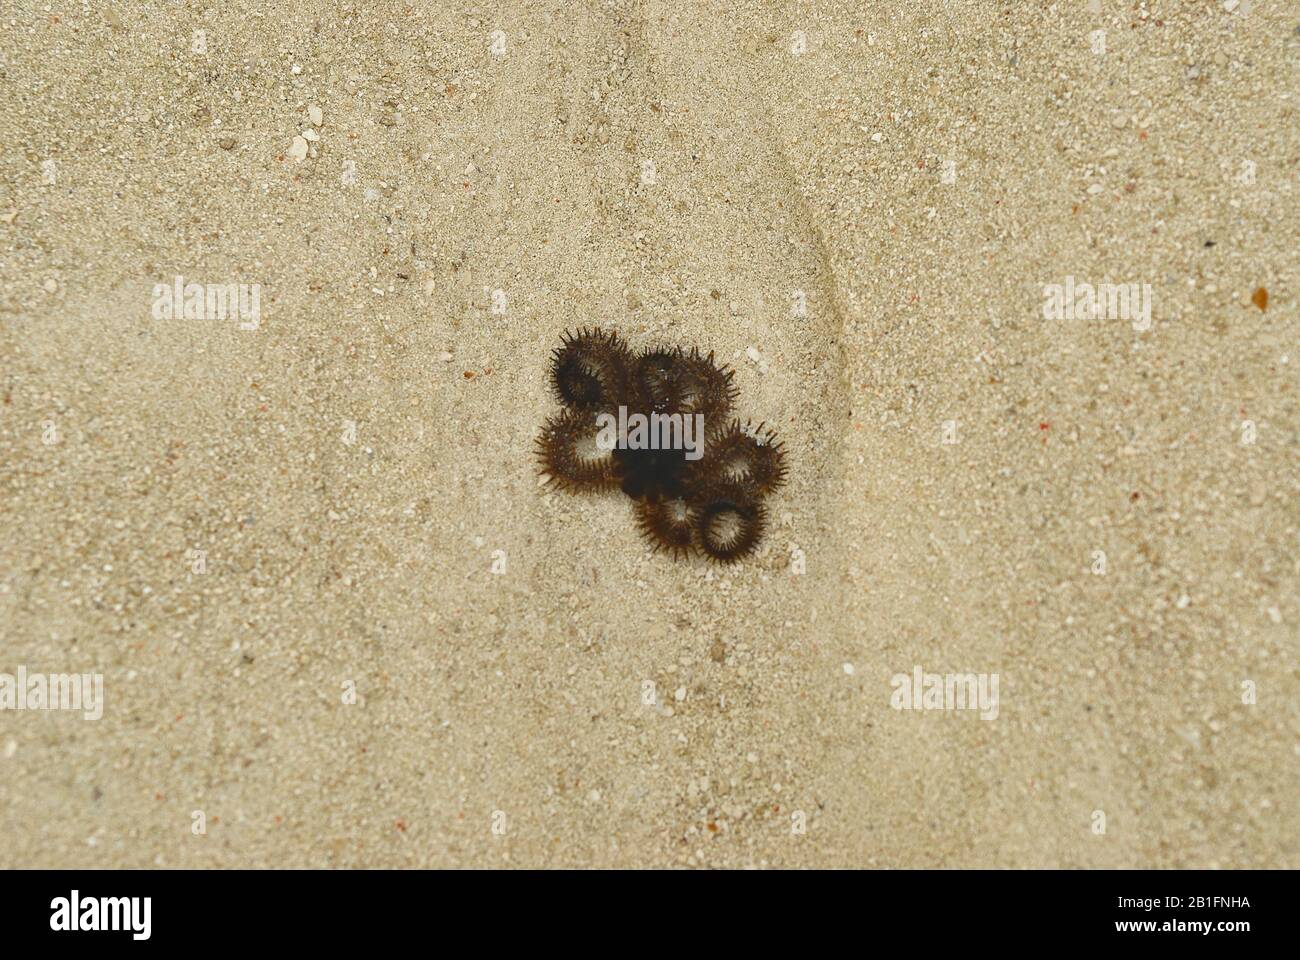 A Brittle Starfish coiled up in shallow water Stock Photo